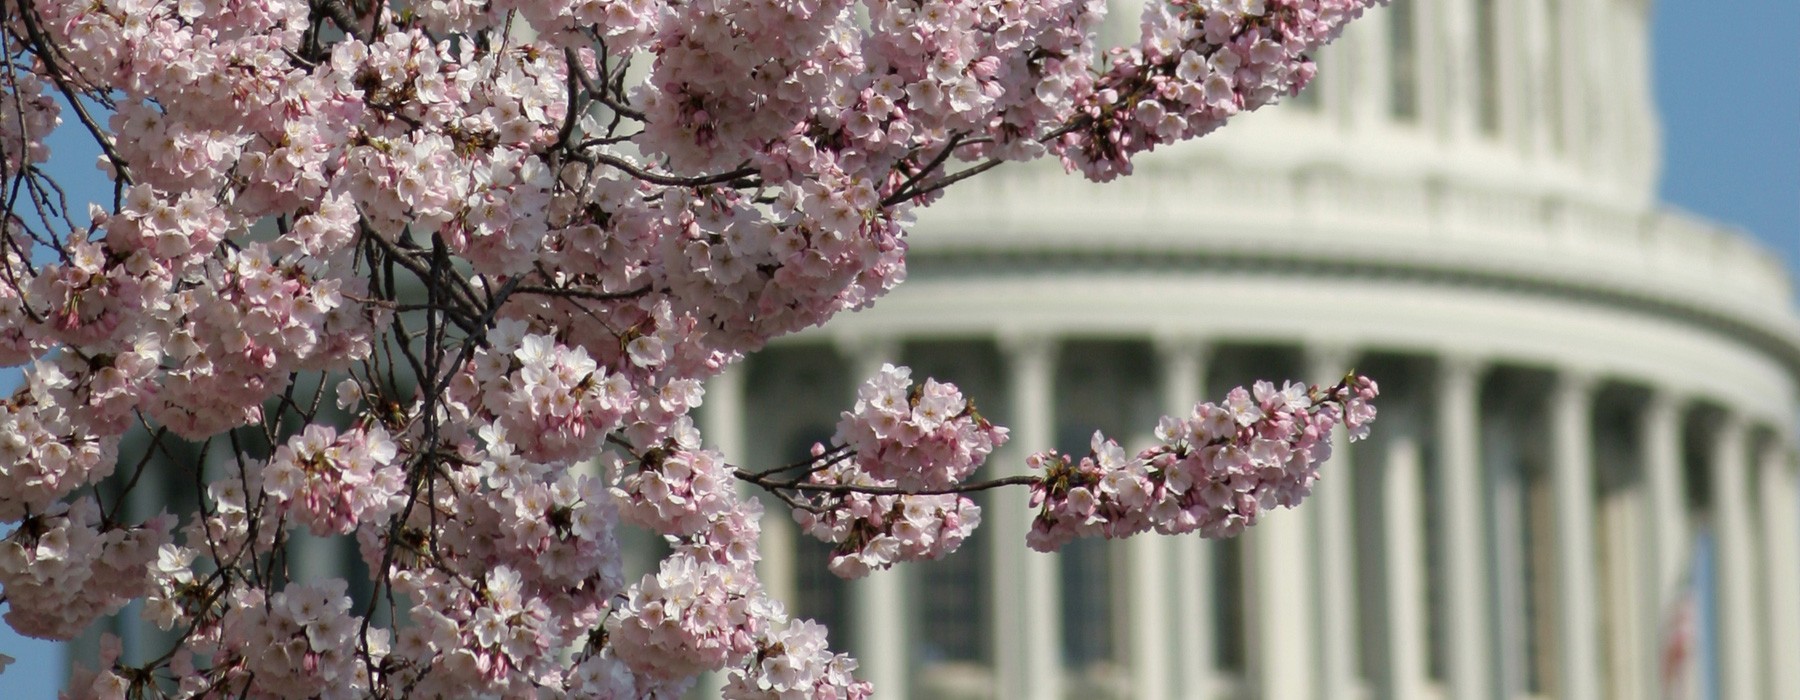 Cherry Blossoms with the United States Capitol Dome in Washington, DC